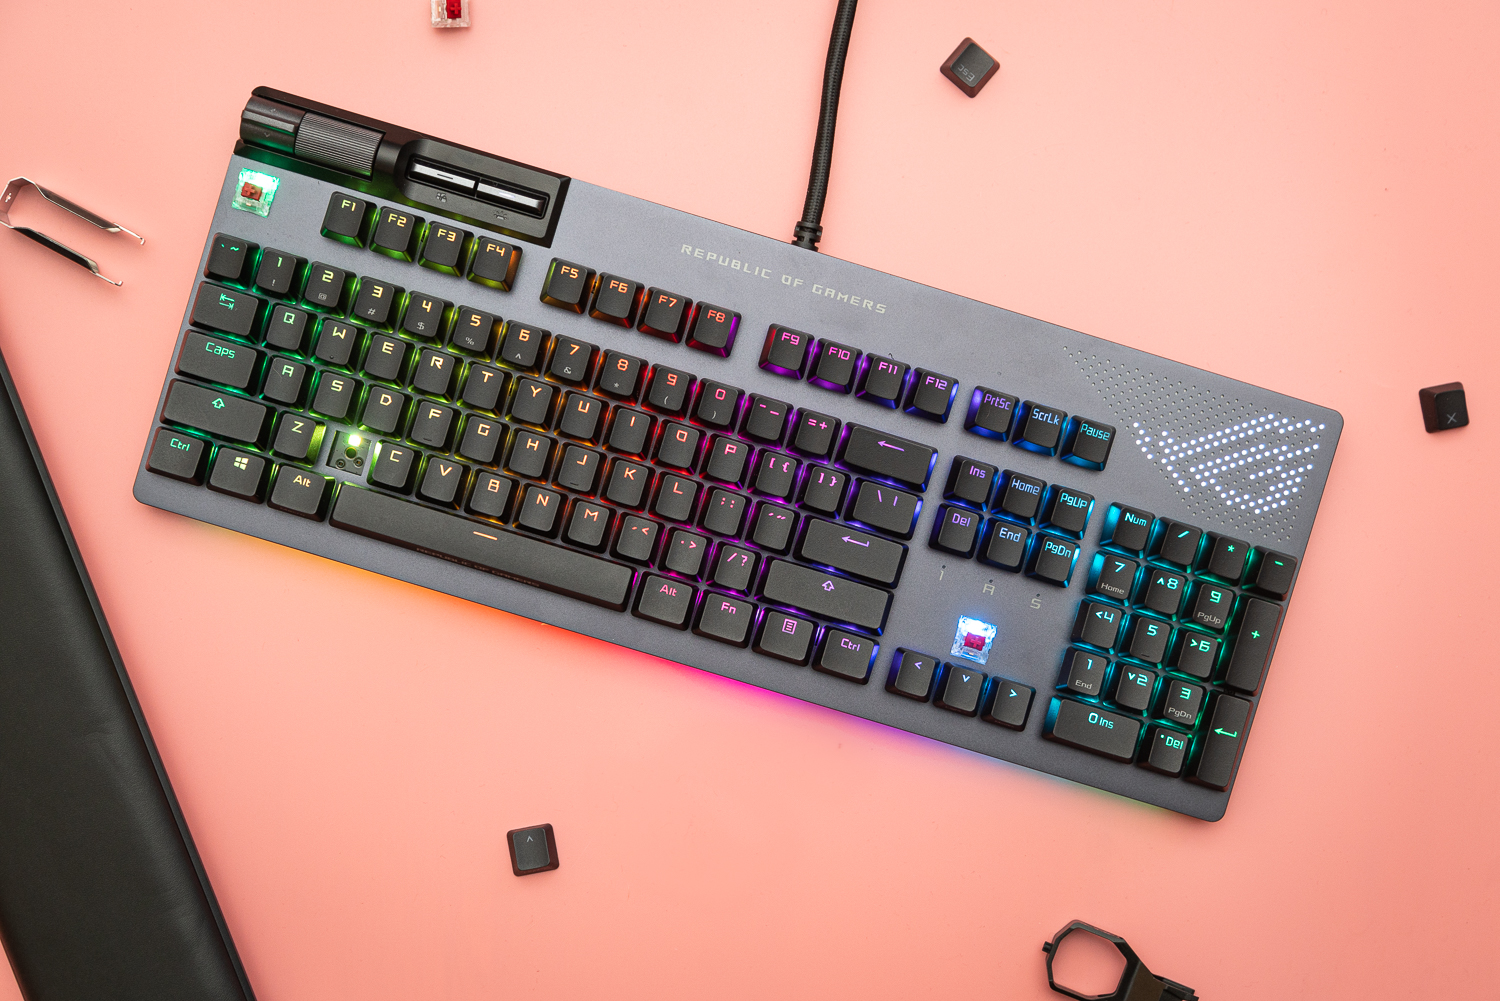 ASUS ROG Strix Scope RX Review: A Surprisingly Fun Keyboard